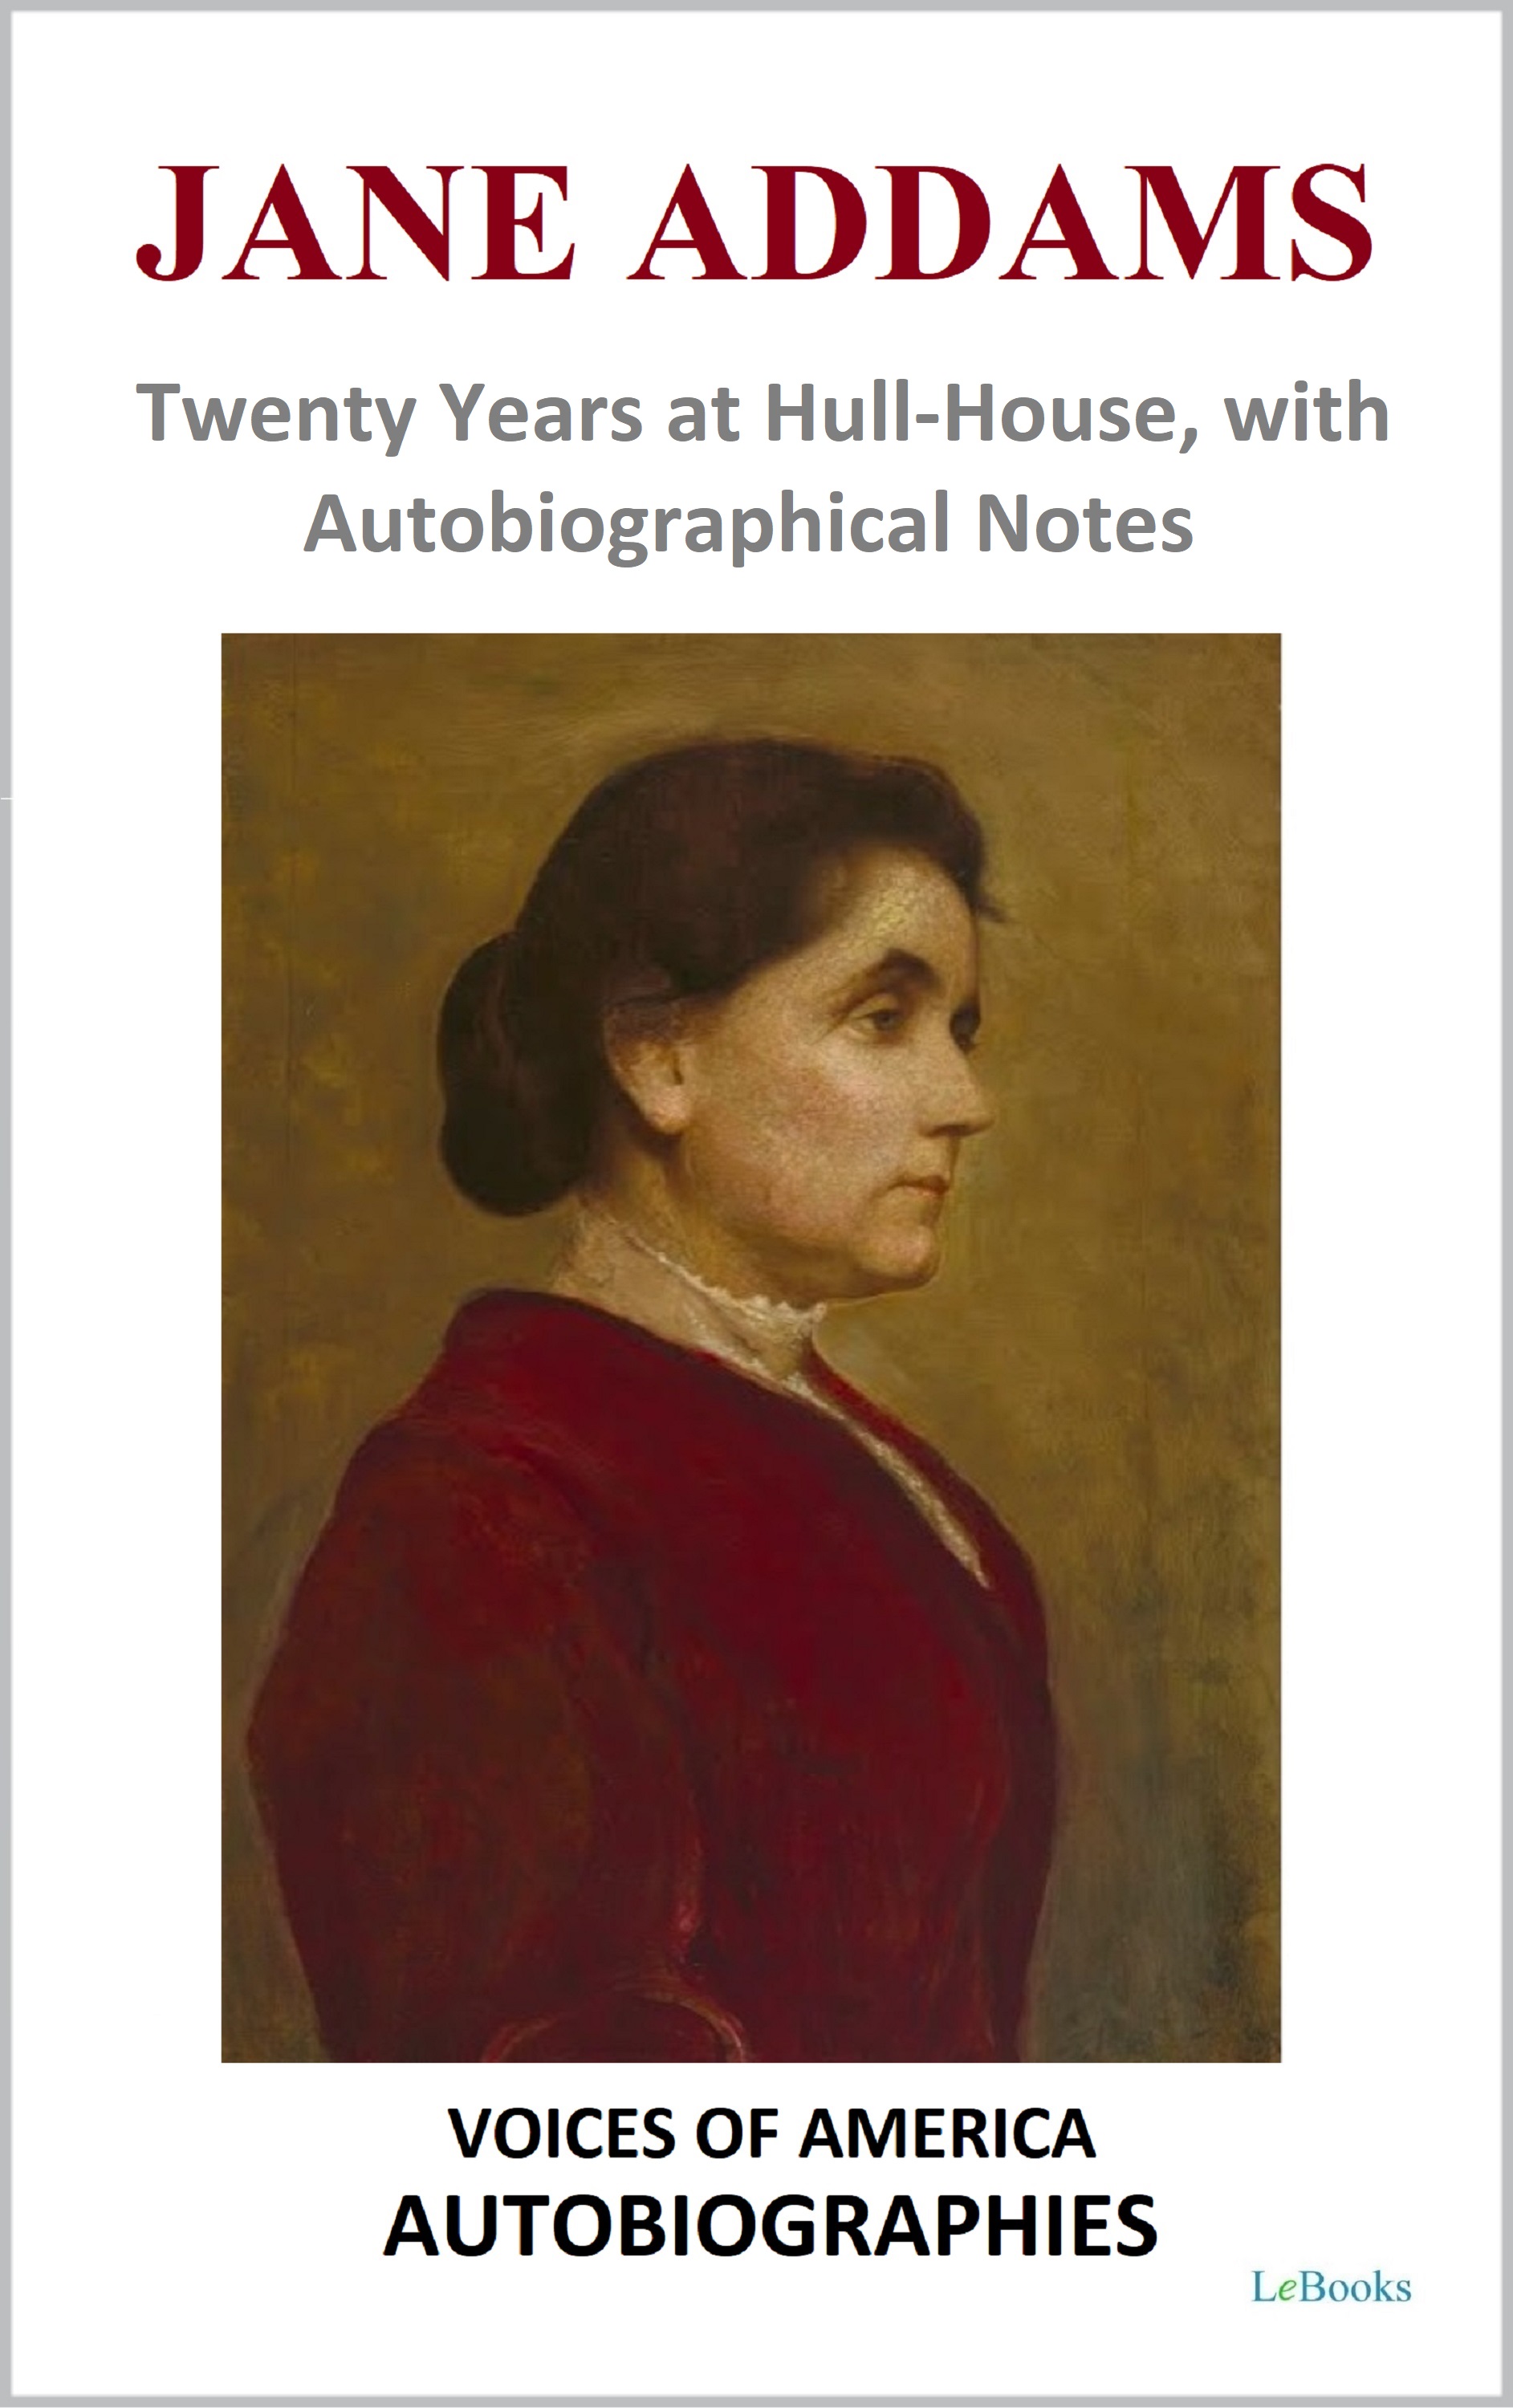 Jane Addams - Twenty Years at Hull-House, with Autobiographical Notes